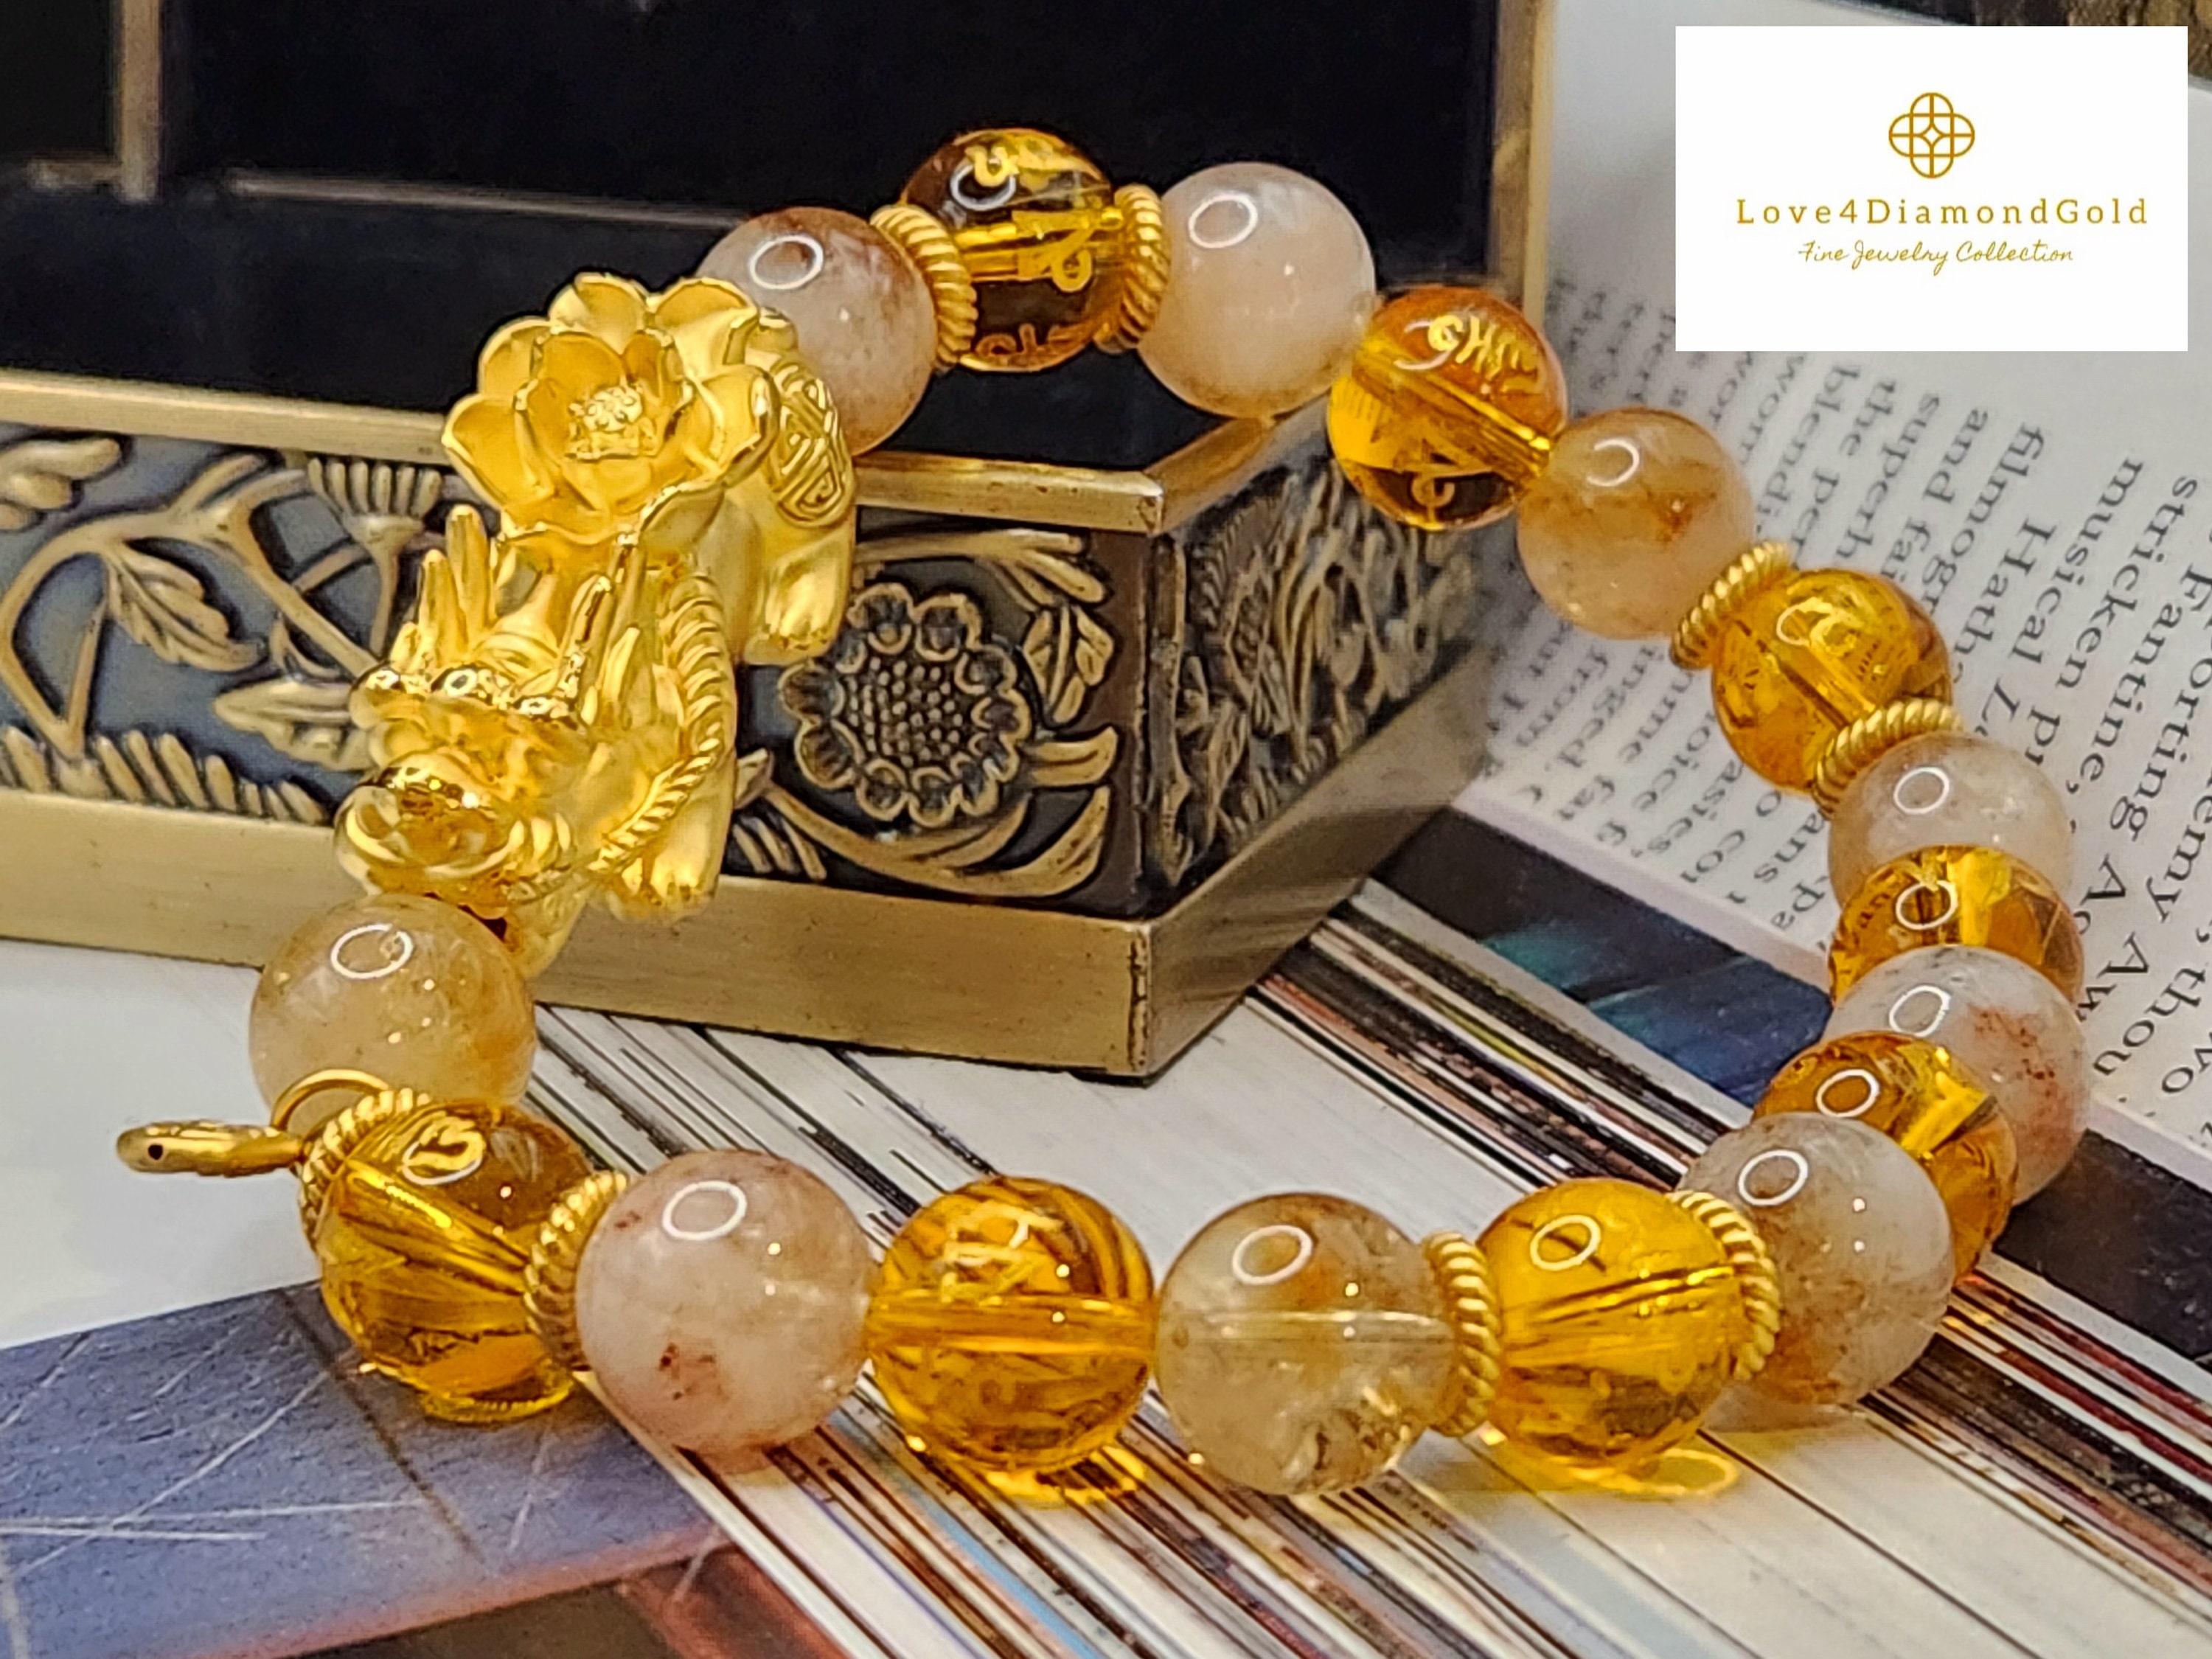 Lab Certified Yellow Citrine Stone Bracelet for Men and Women, 8 mm -  Tantra Astro